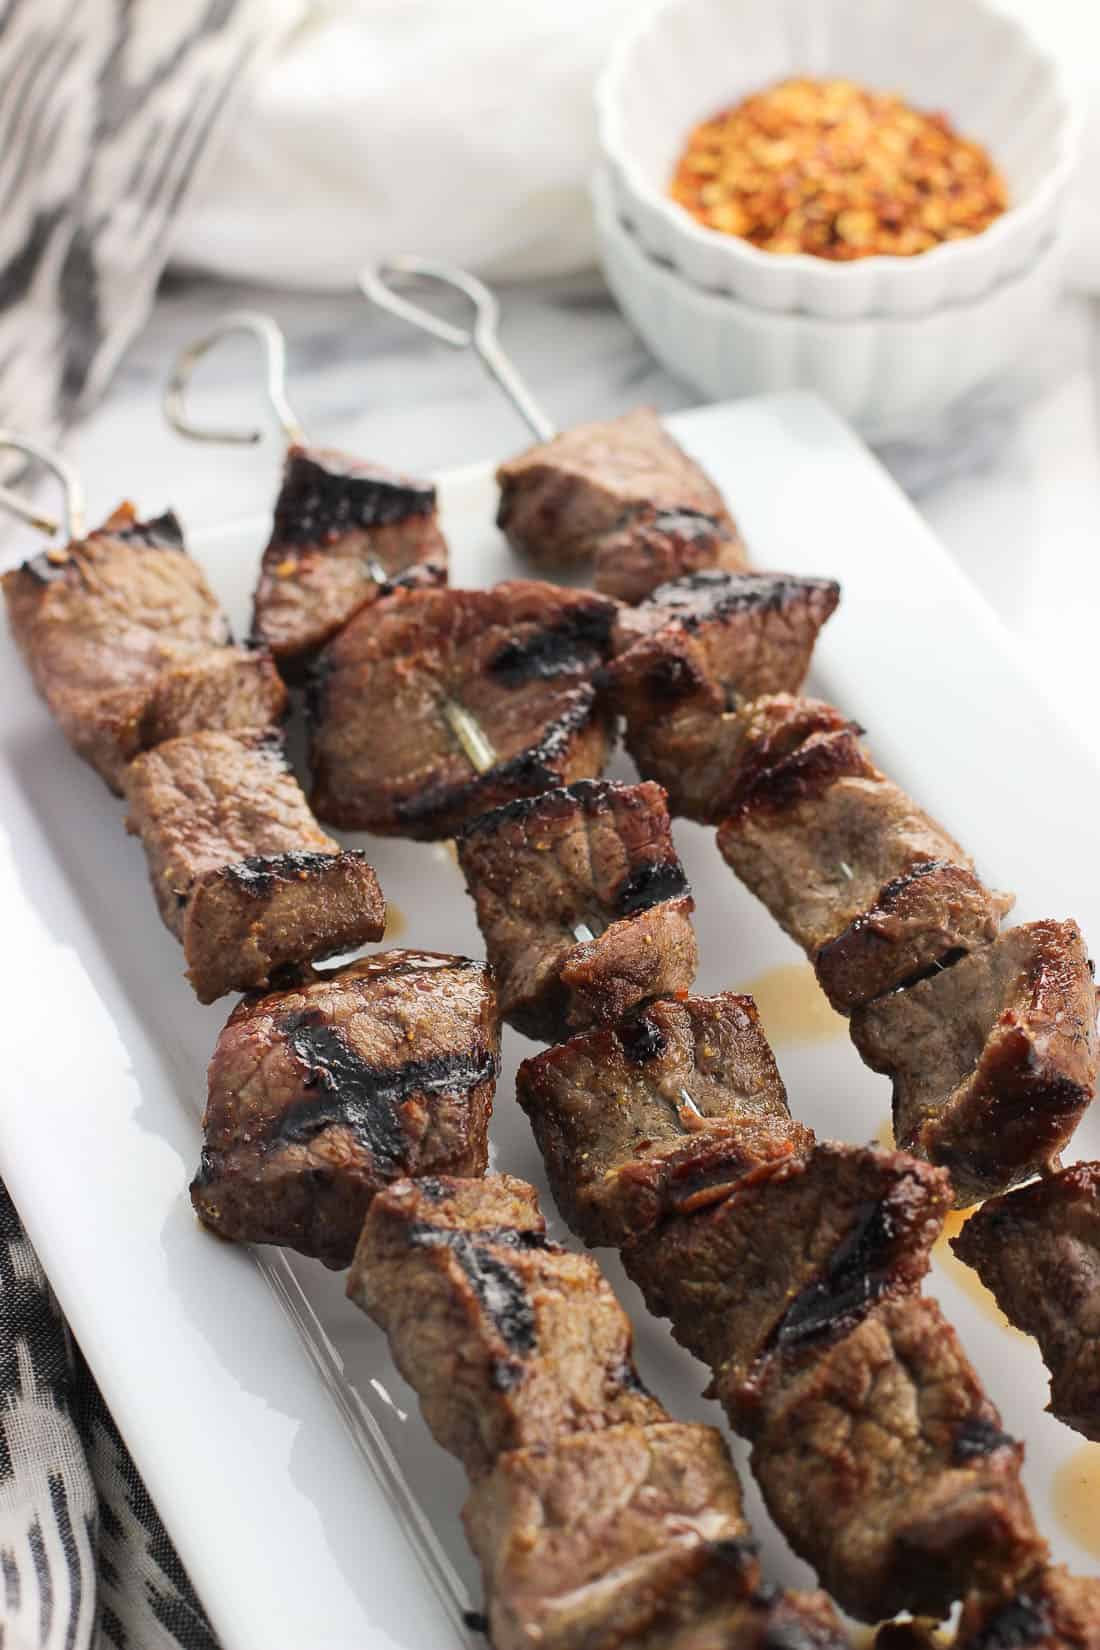 Three skewers of beef with a small bowl of dry seasoning in the background